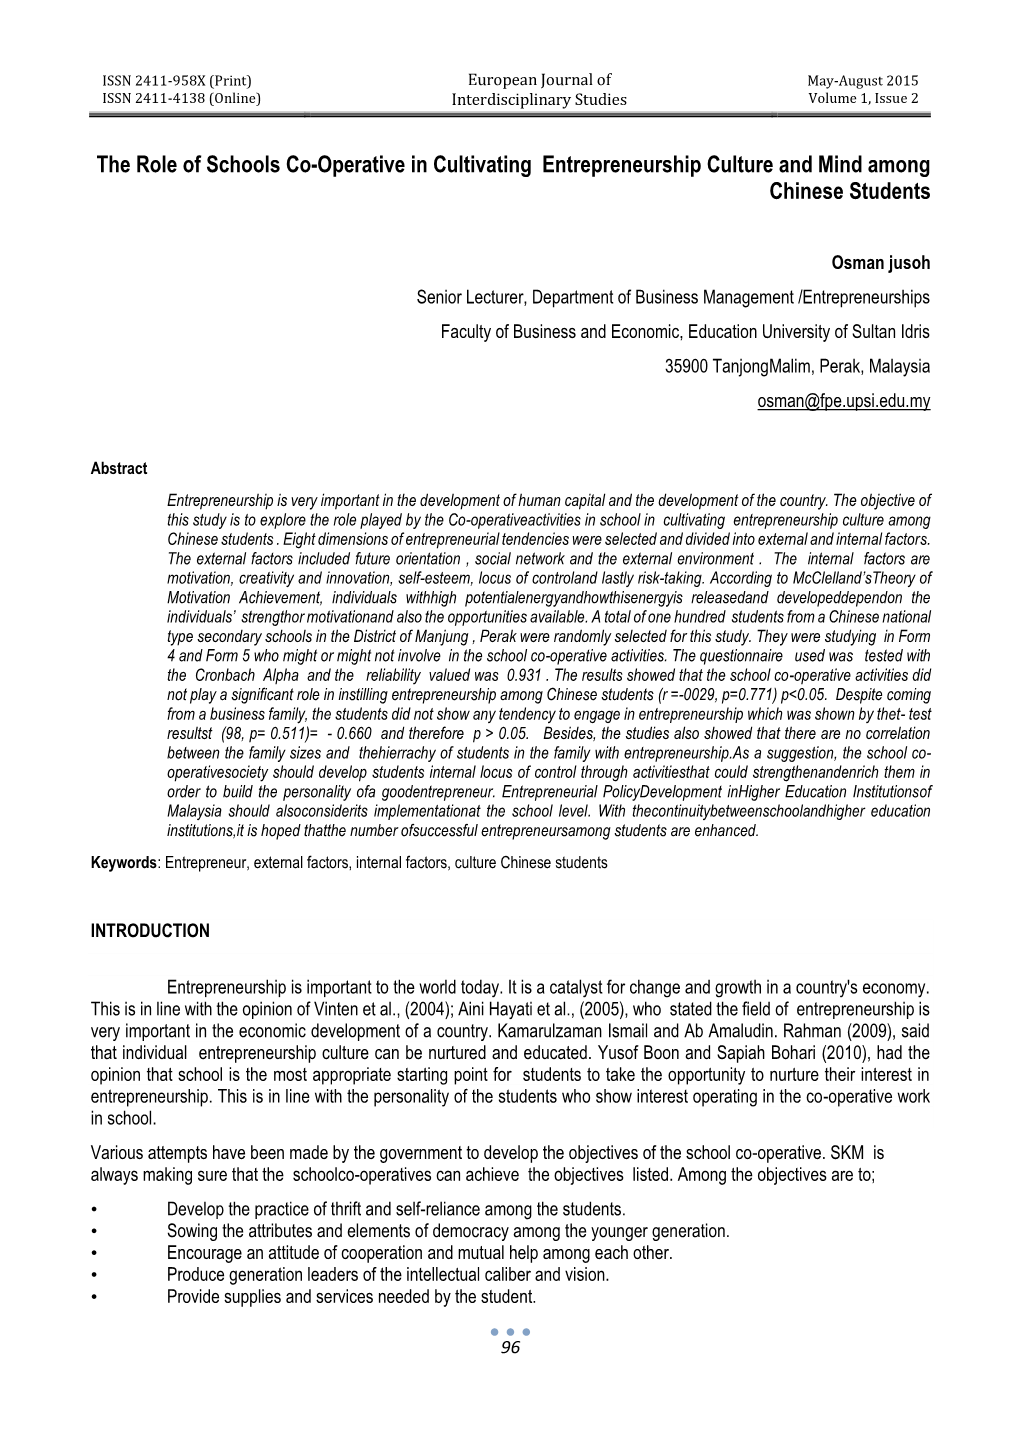 The Role of Schools Co-Operative in Cultivating Entrepreneurship Culture and Mind Among Chinese Students